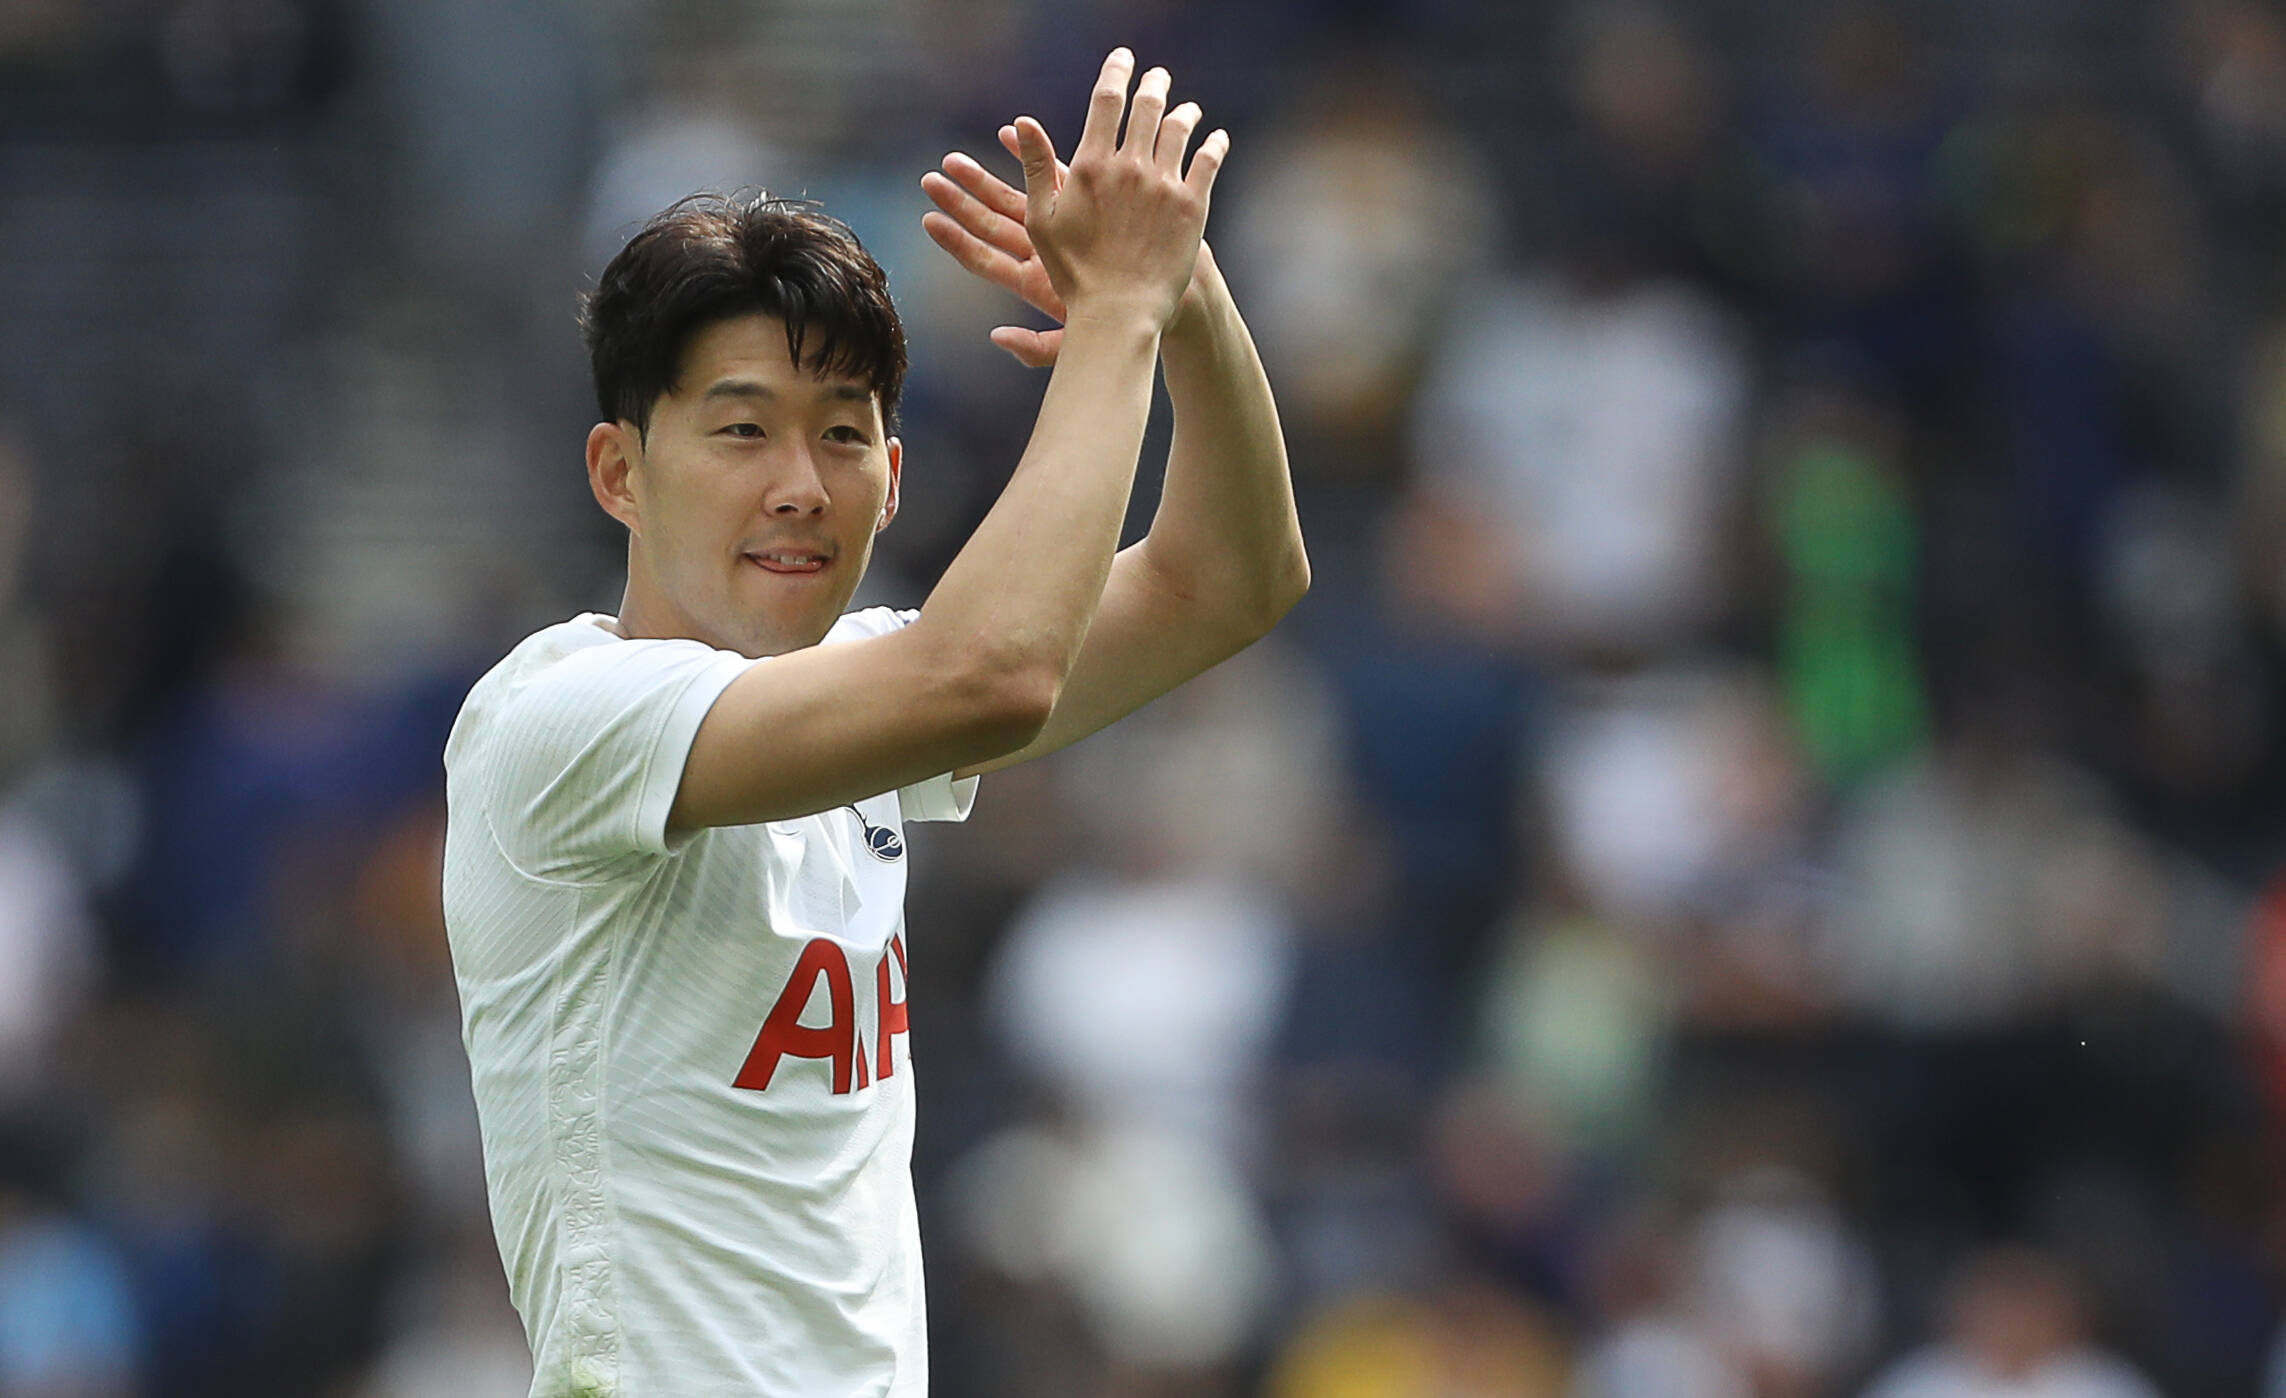 Son scored the only goal of the game as Tottenham beat Man City